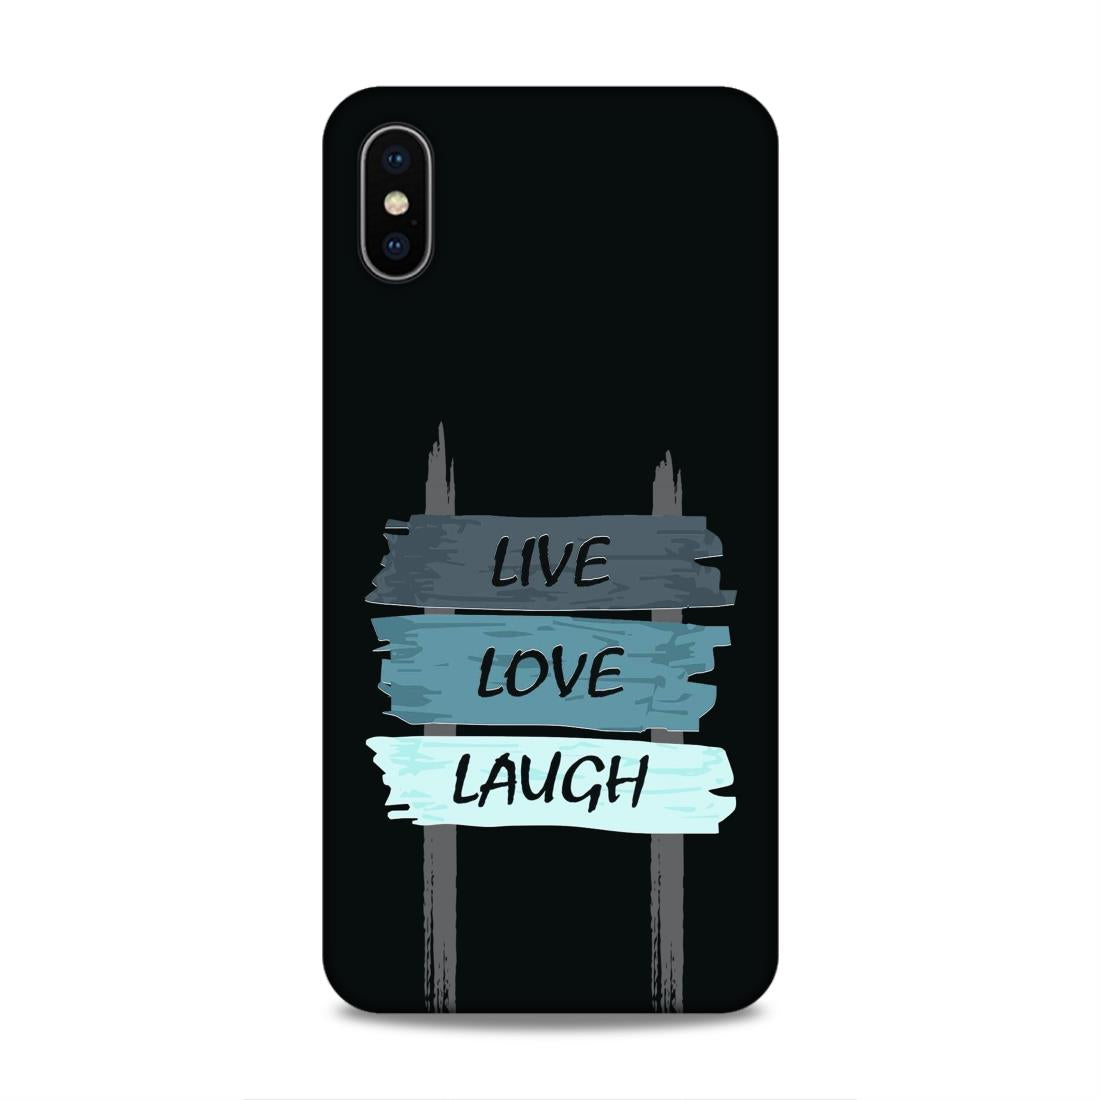 Live Love Laugh Hard Back Case For Apple iPhone XS Max